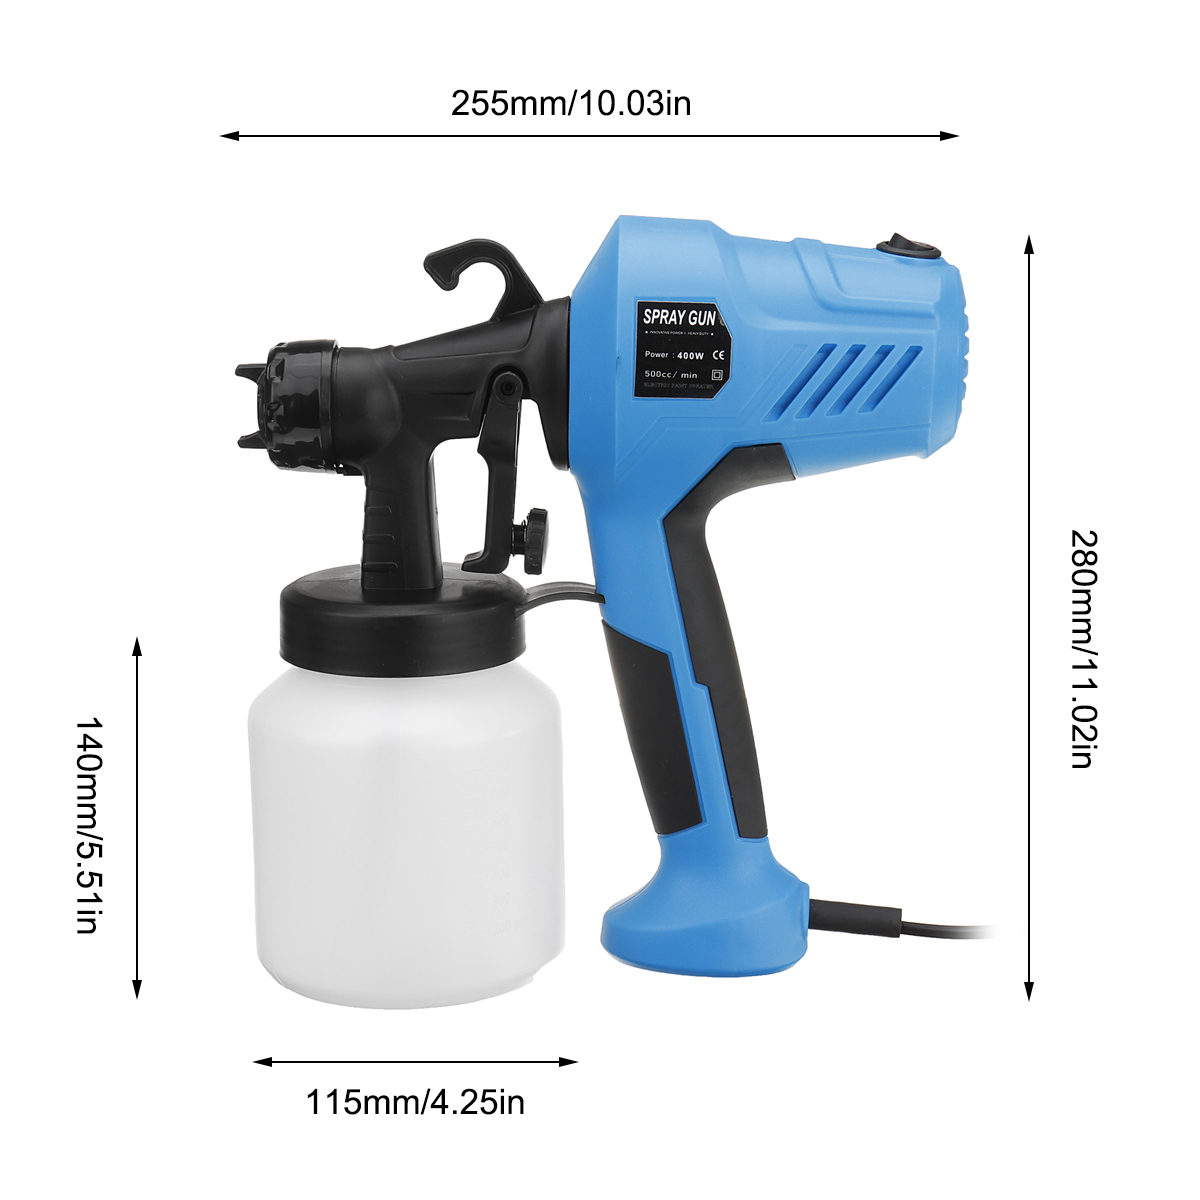 800ml-220V-400W-High-Power-Electric-Machine-Paint-Sprayer-Painting-Fogger-Sprayer-Tool-For-Indoor-An-1716537-6